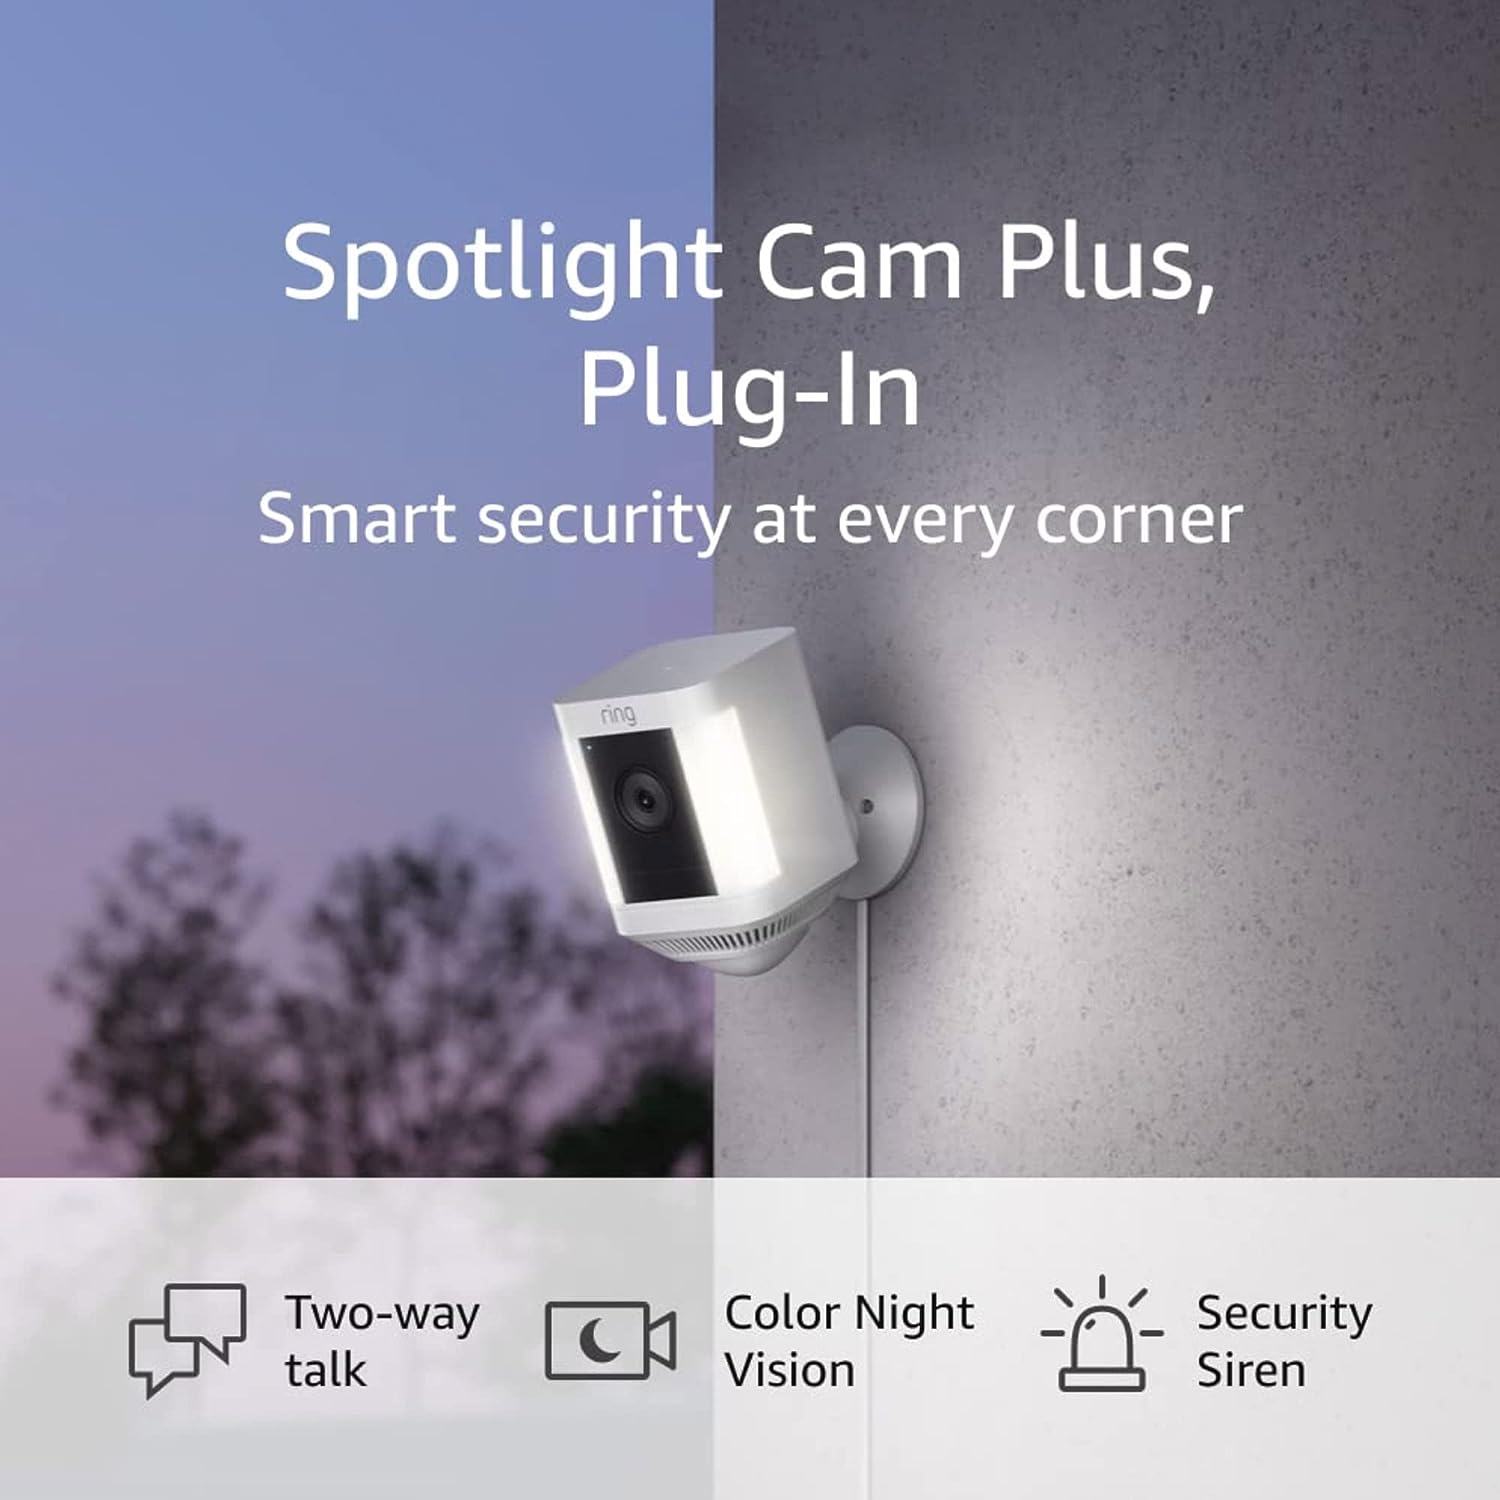 Ring Spotlight Cam Plus, Plug-in | Two-Way Talk, Color Night Vision, and Security Siren - Technology Reviews